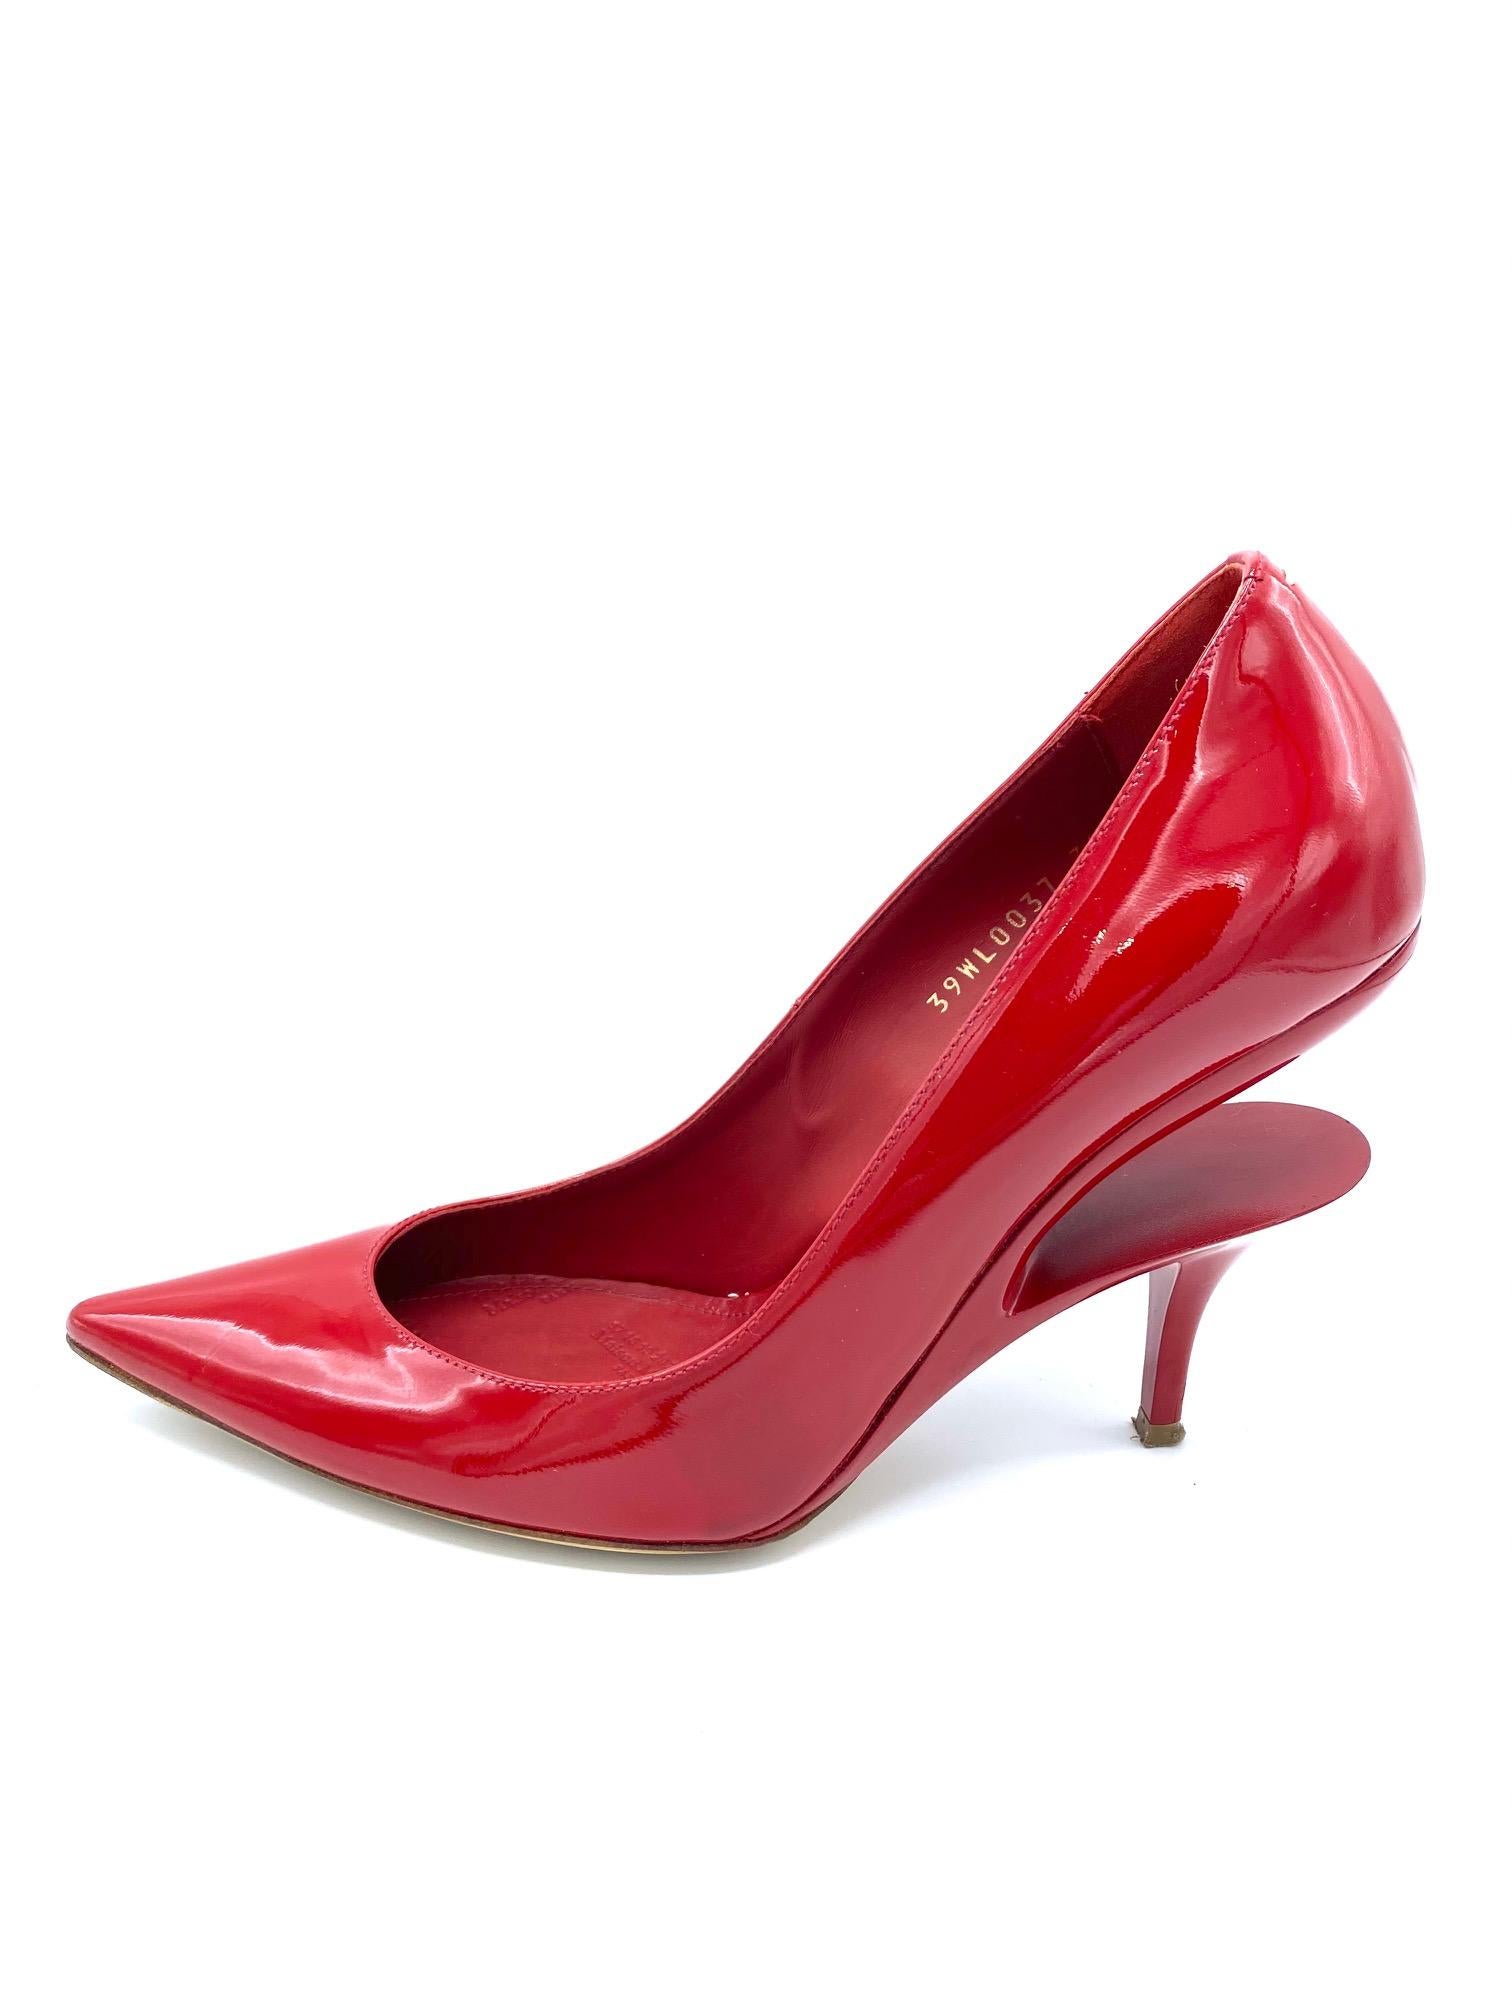 Product details:

Featuring red patent leather, ghost wedge pump heel and pointy toe, heel height is 4.25